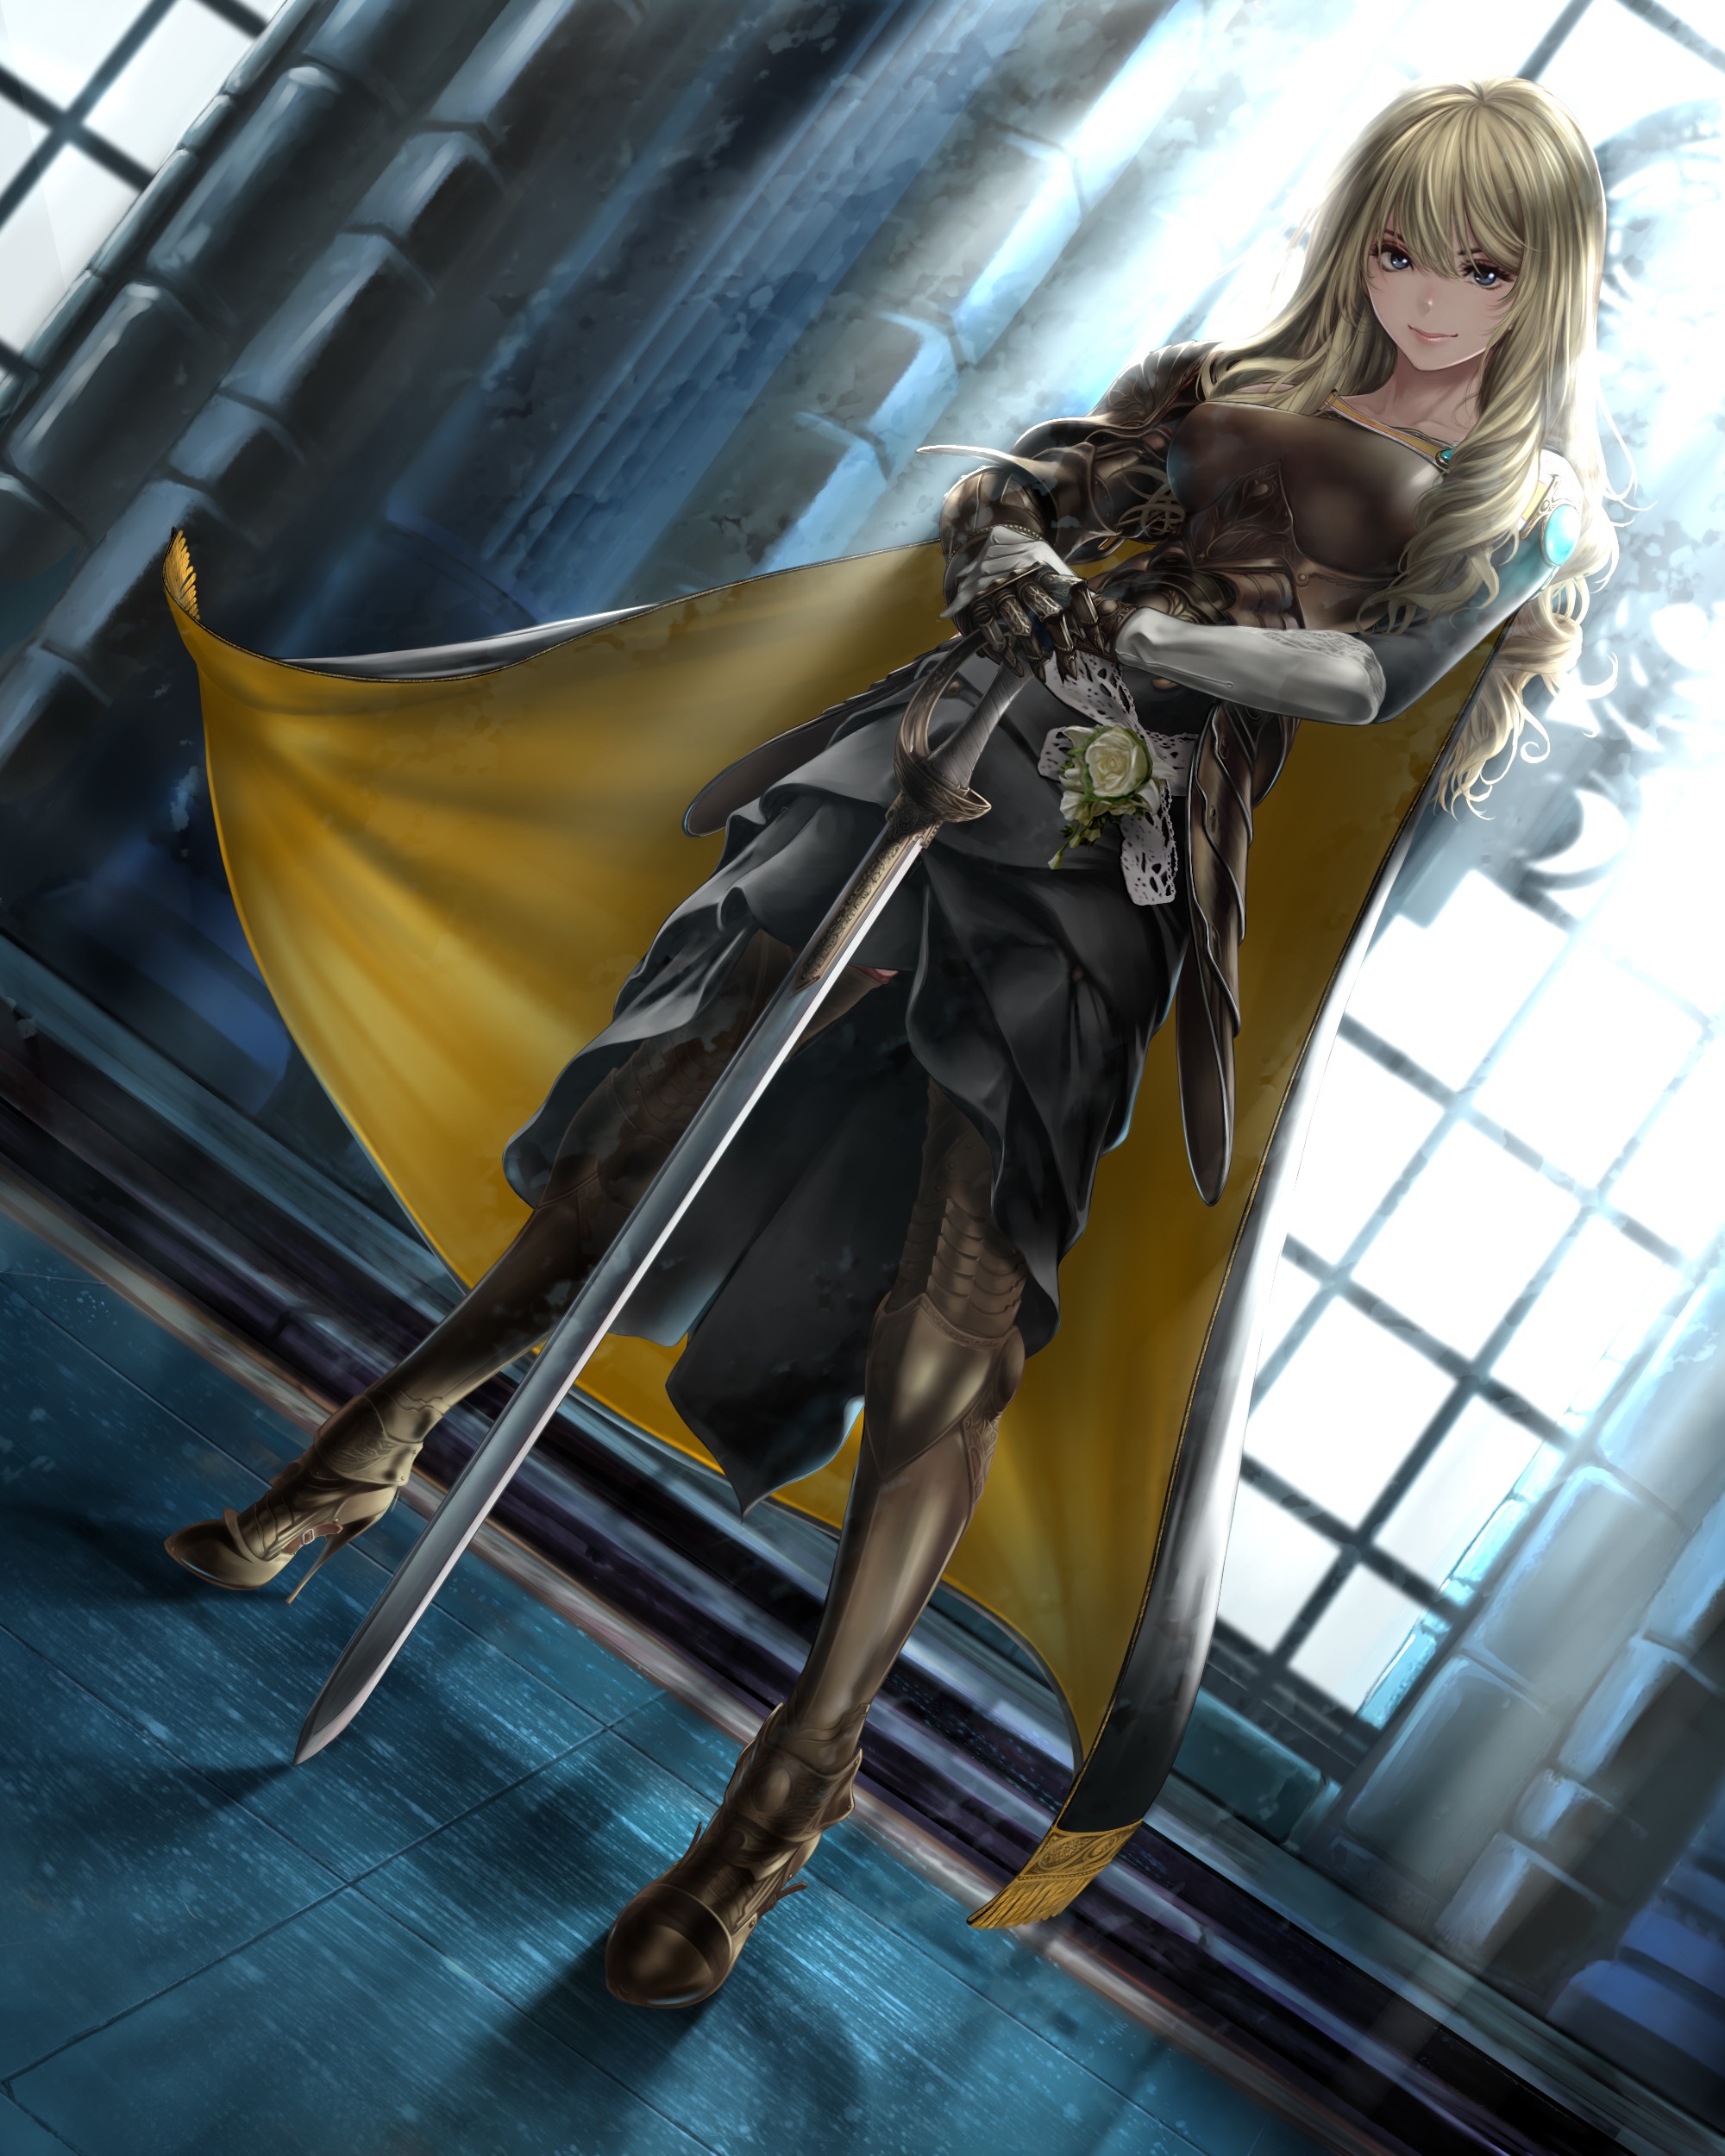 Anime 2000x2500 anime anime girls armor heels sword long hair original characters Pixiv girls with guns women with swords standing looking at viewer women weapon blonde fantasy art fantasy girl Ape fantasy armor